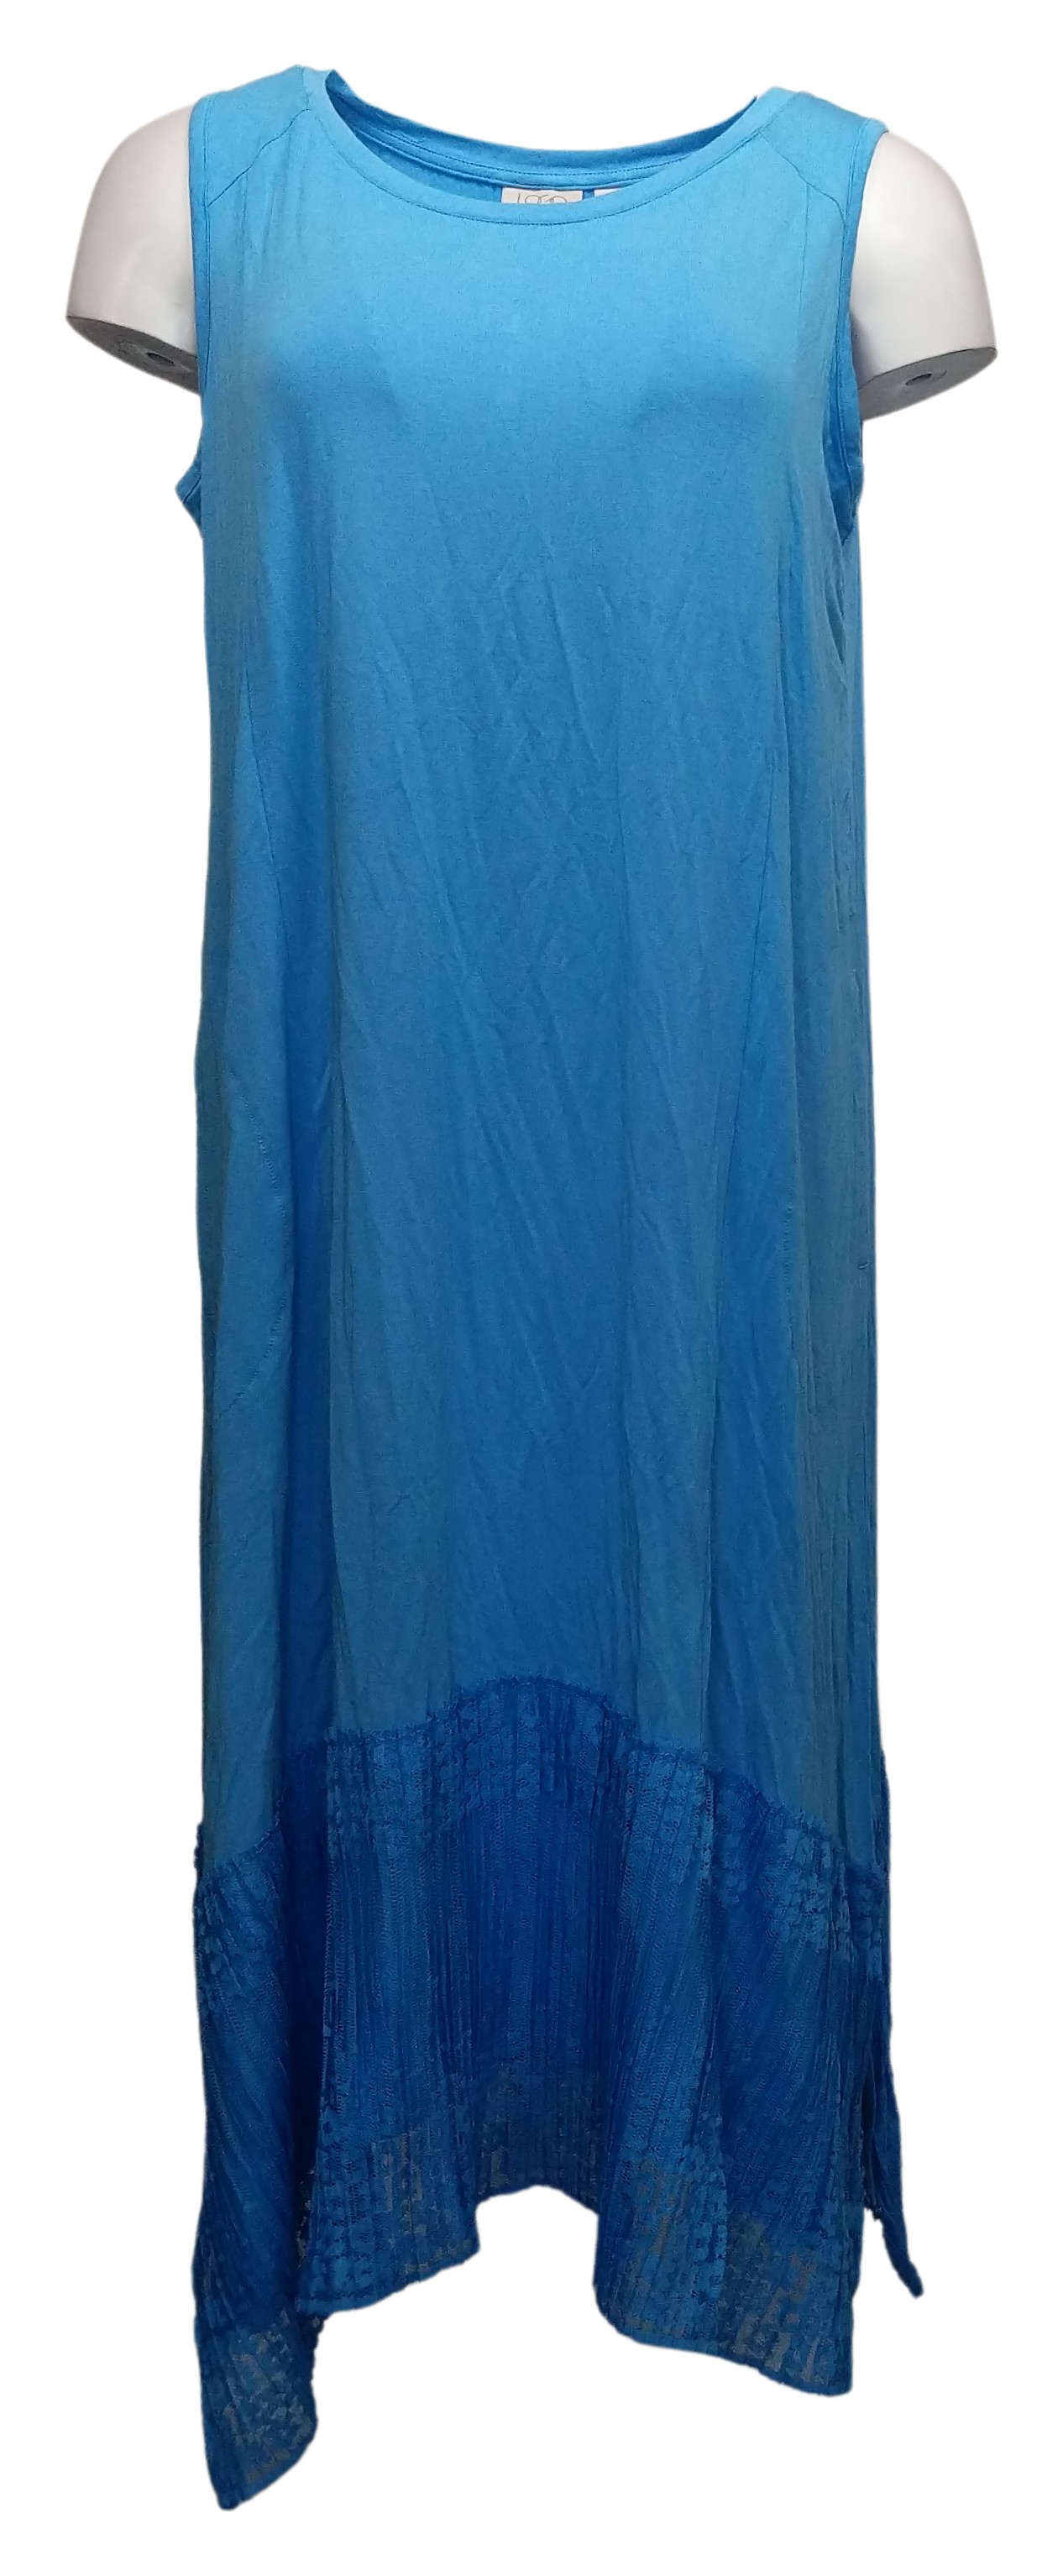 LOGO by Lori Goldstein Rayon 230 Dress with Broomstick Lace Women's Sz M Blue